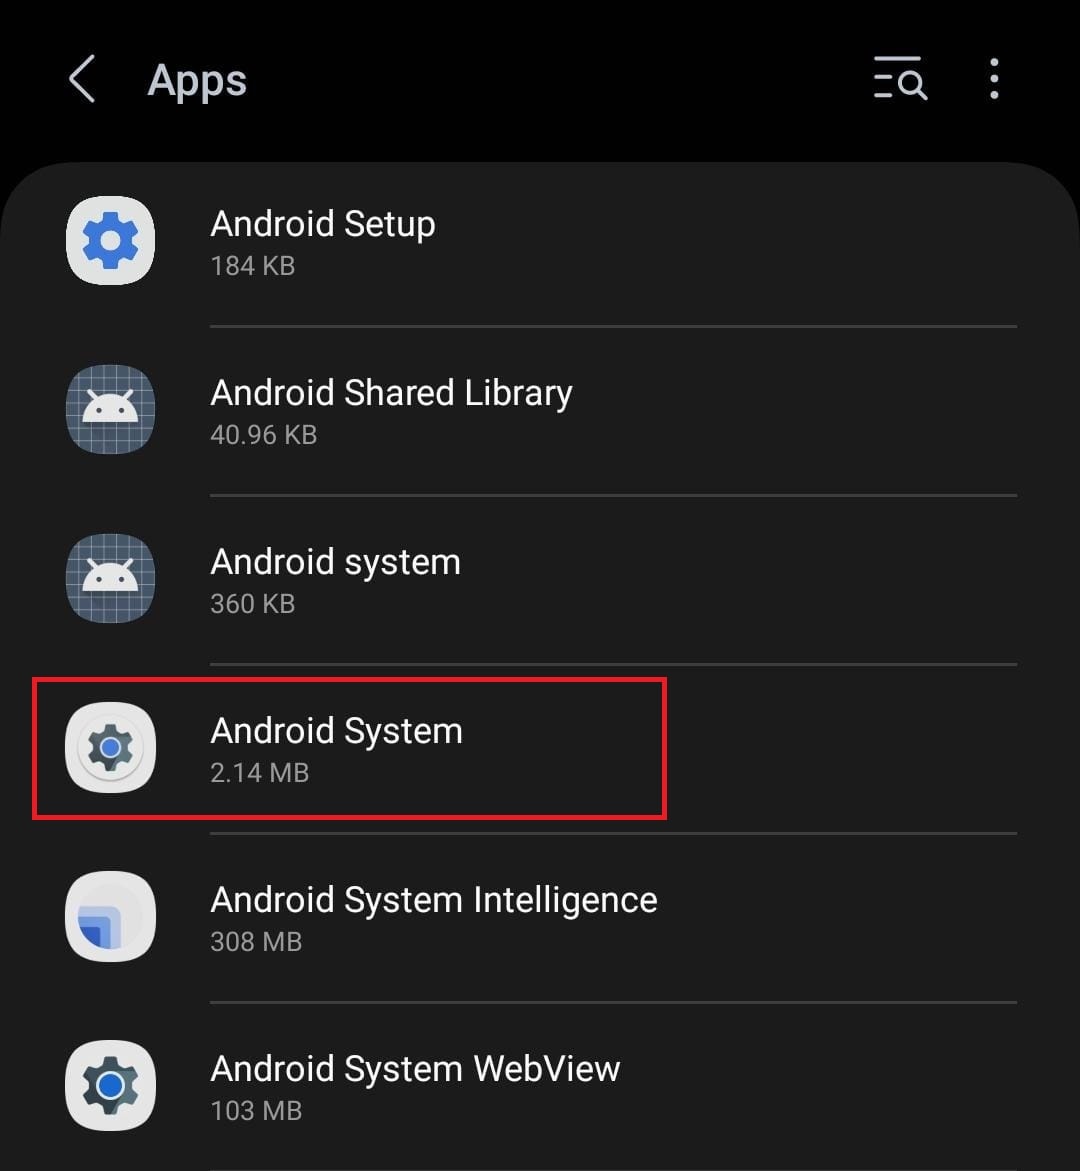 Tap on the Android system option.